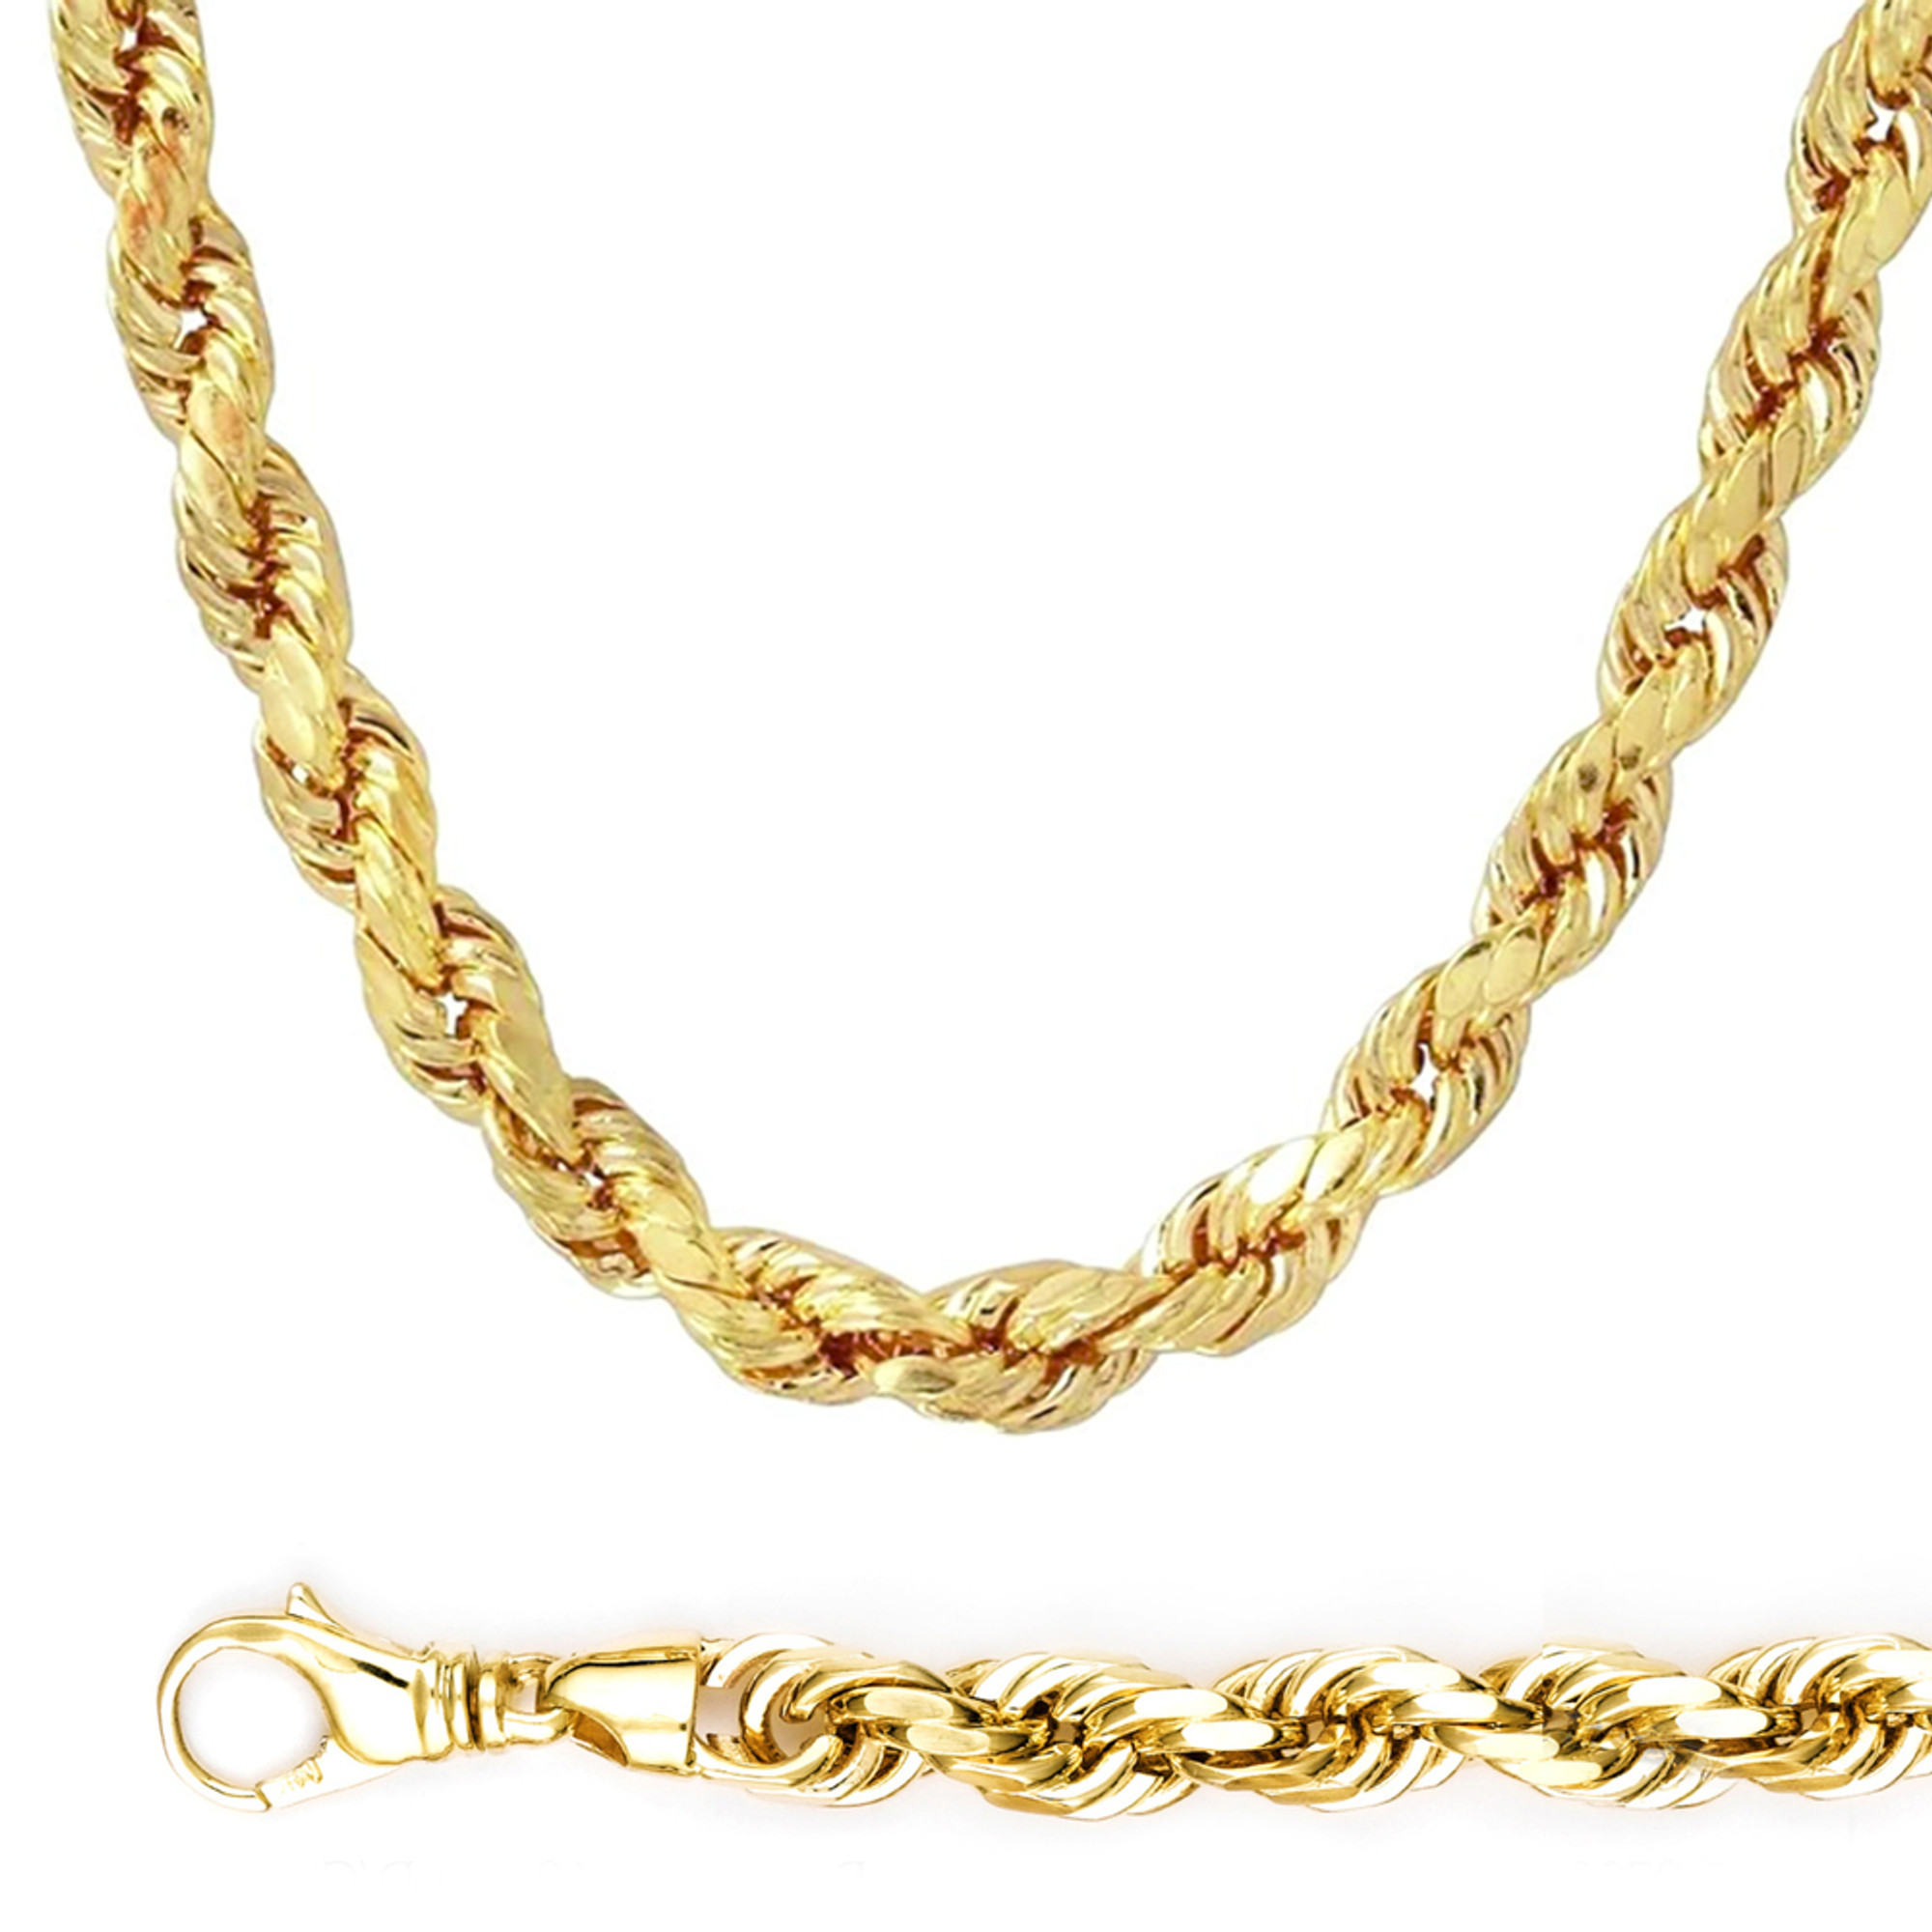 Cutting Equal Lengths of Jewelry Chain